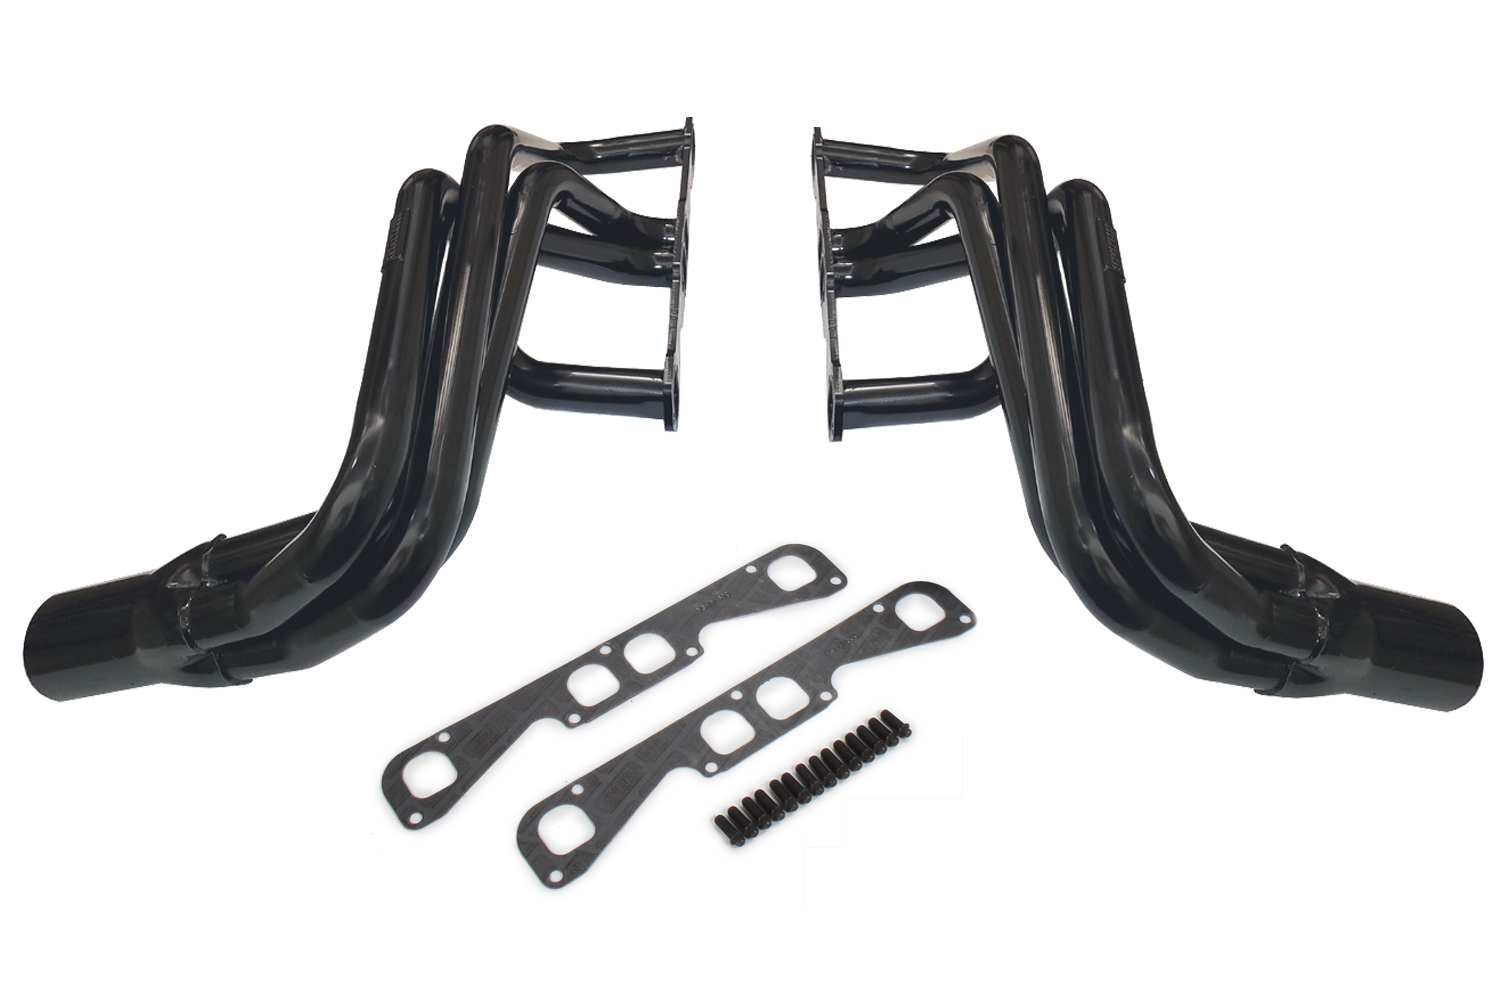 Schoenfeld Headers 187SP - Headers, Street Stock, 1-7/8 in Primary, 3-1/2 in Collector, Spread Port, Steel, Black Paint, Small Block Chevy, GM A / F / G-Body, Kit